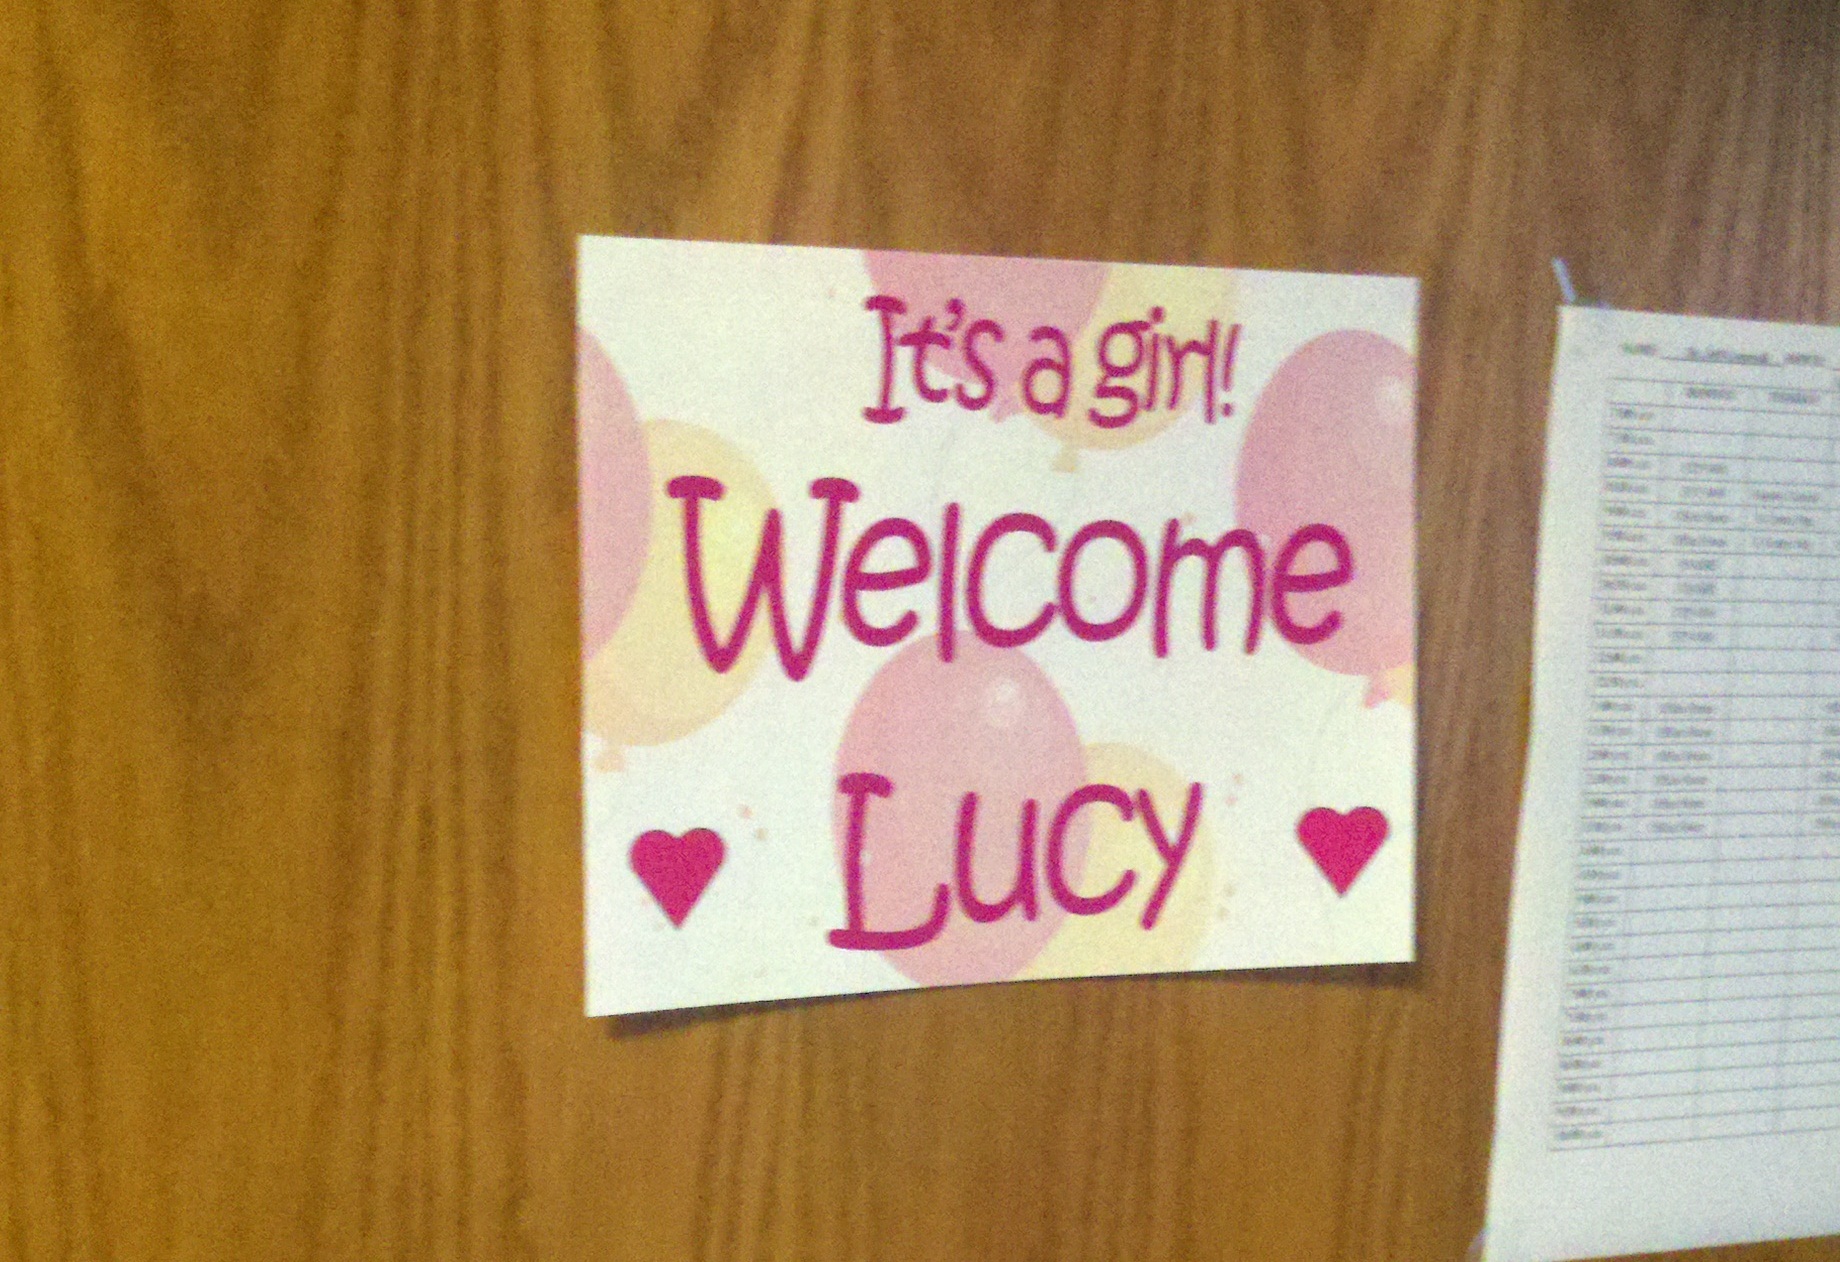 welcome lucy.jpg